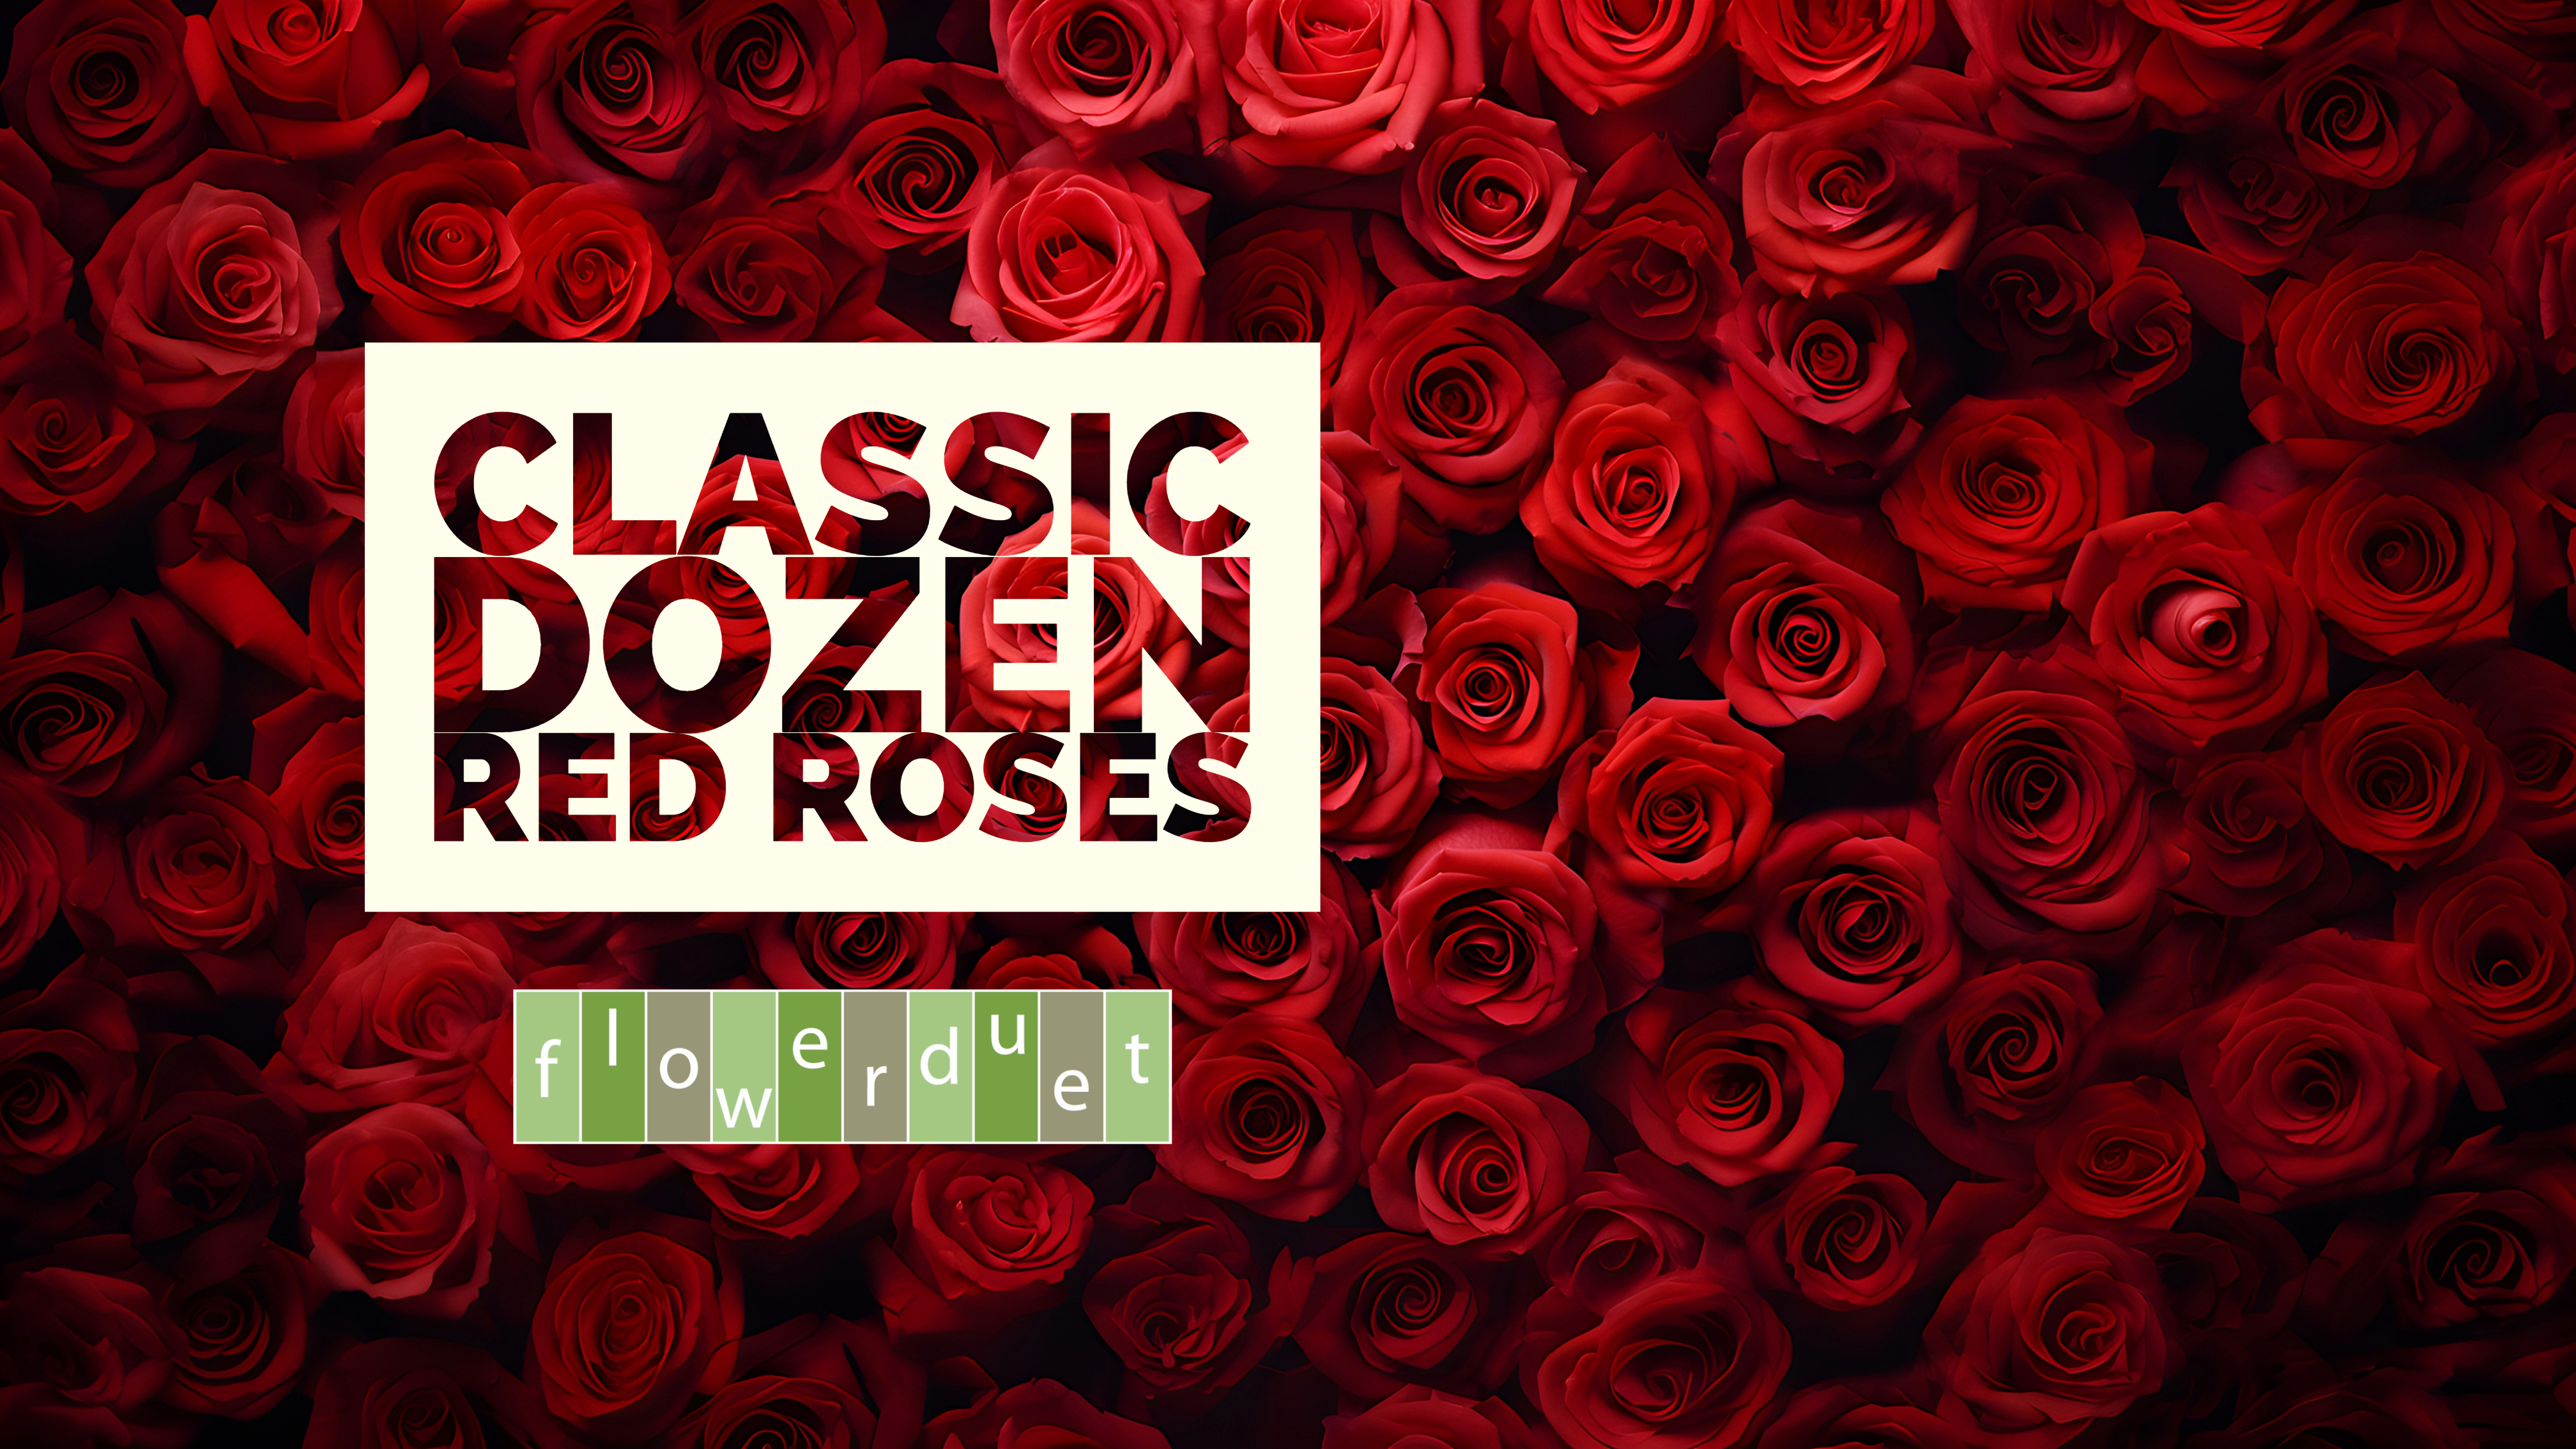 Red Roses with Classic Dozen Red Roses